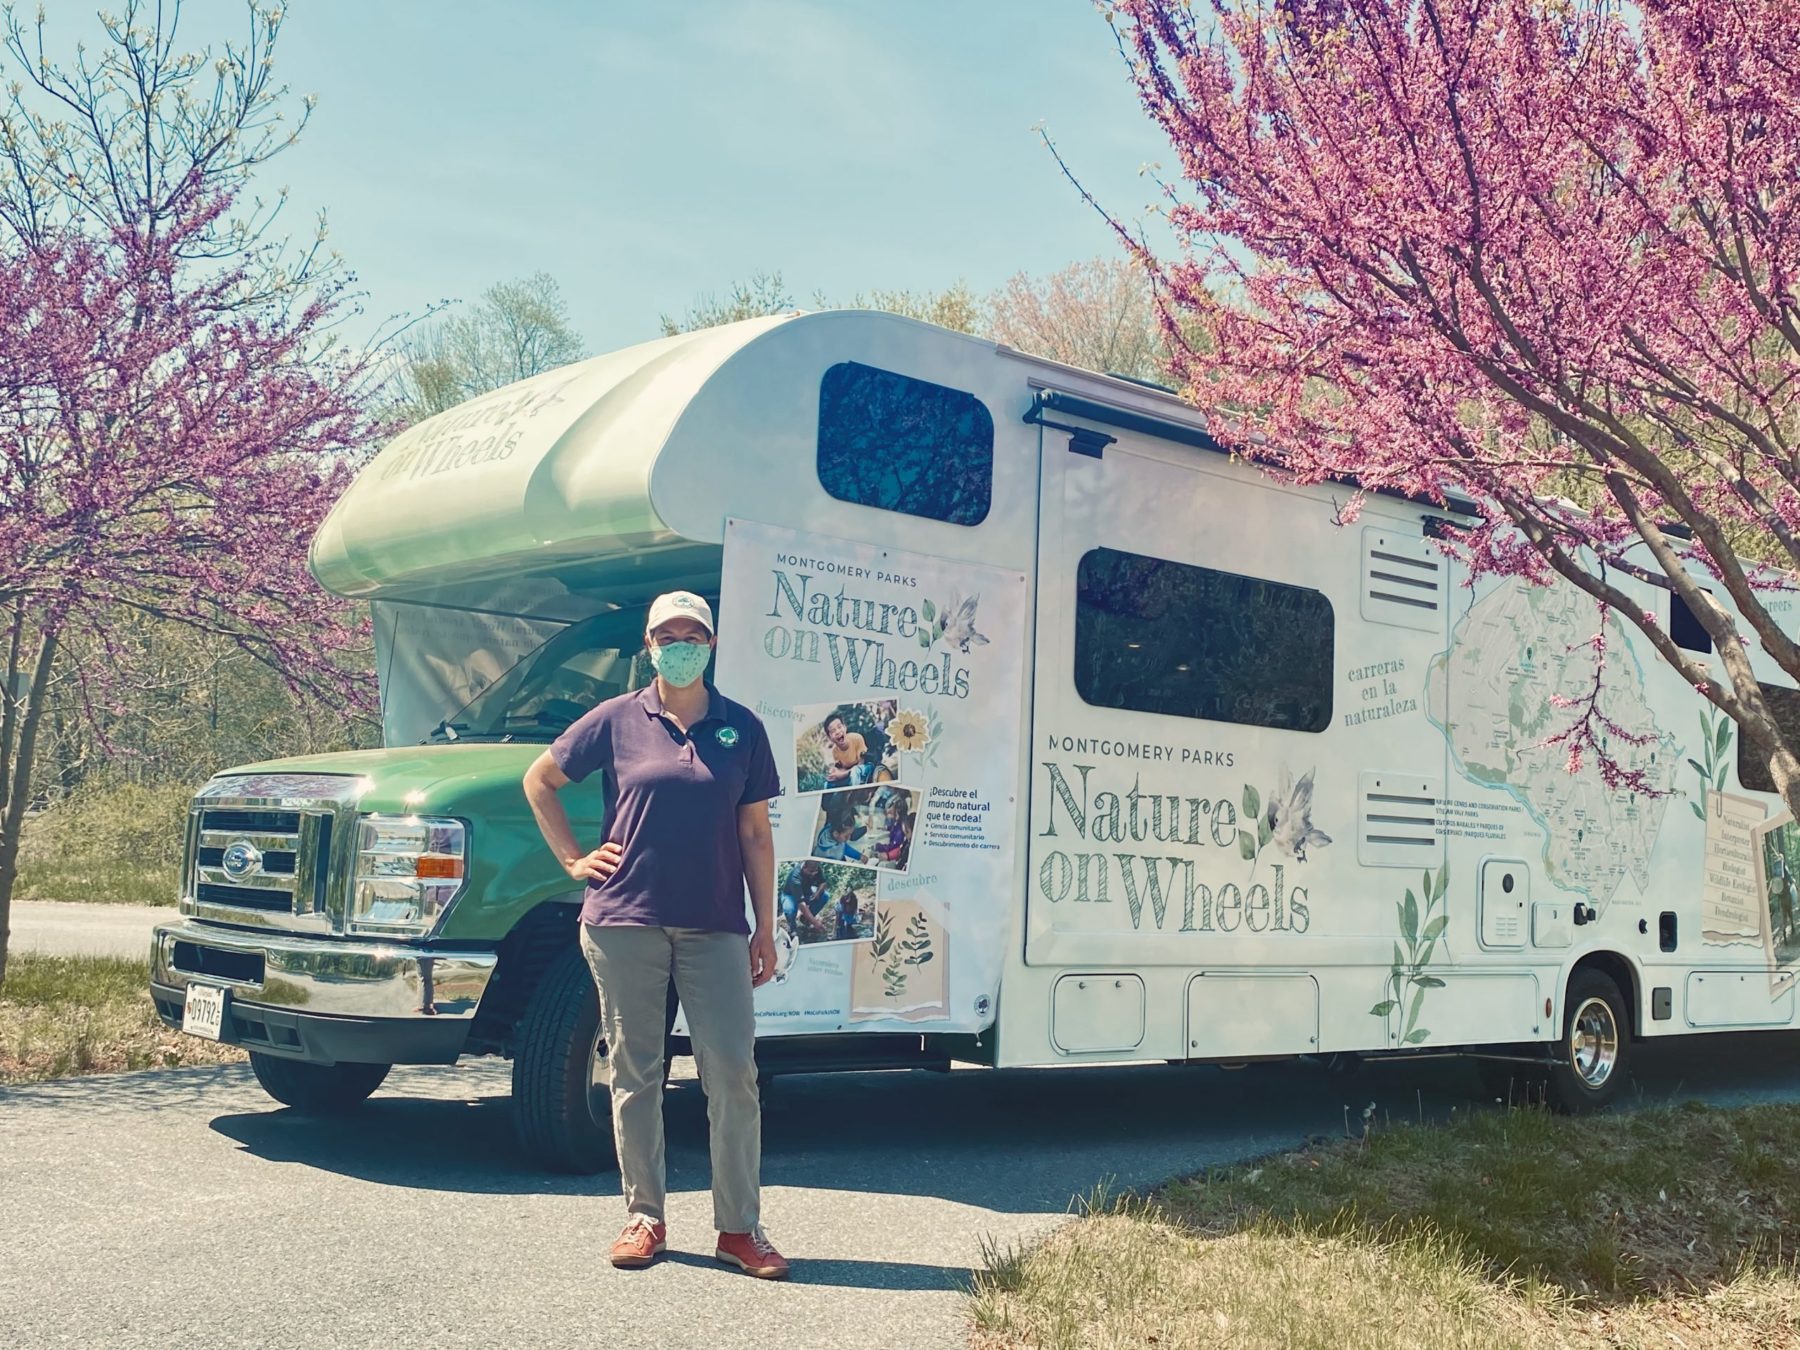 A naturalist stands in front of the Nature on Wheels RV